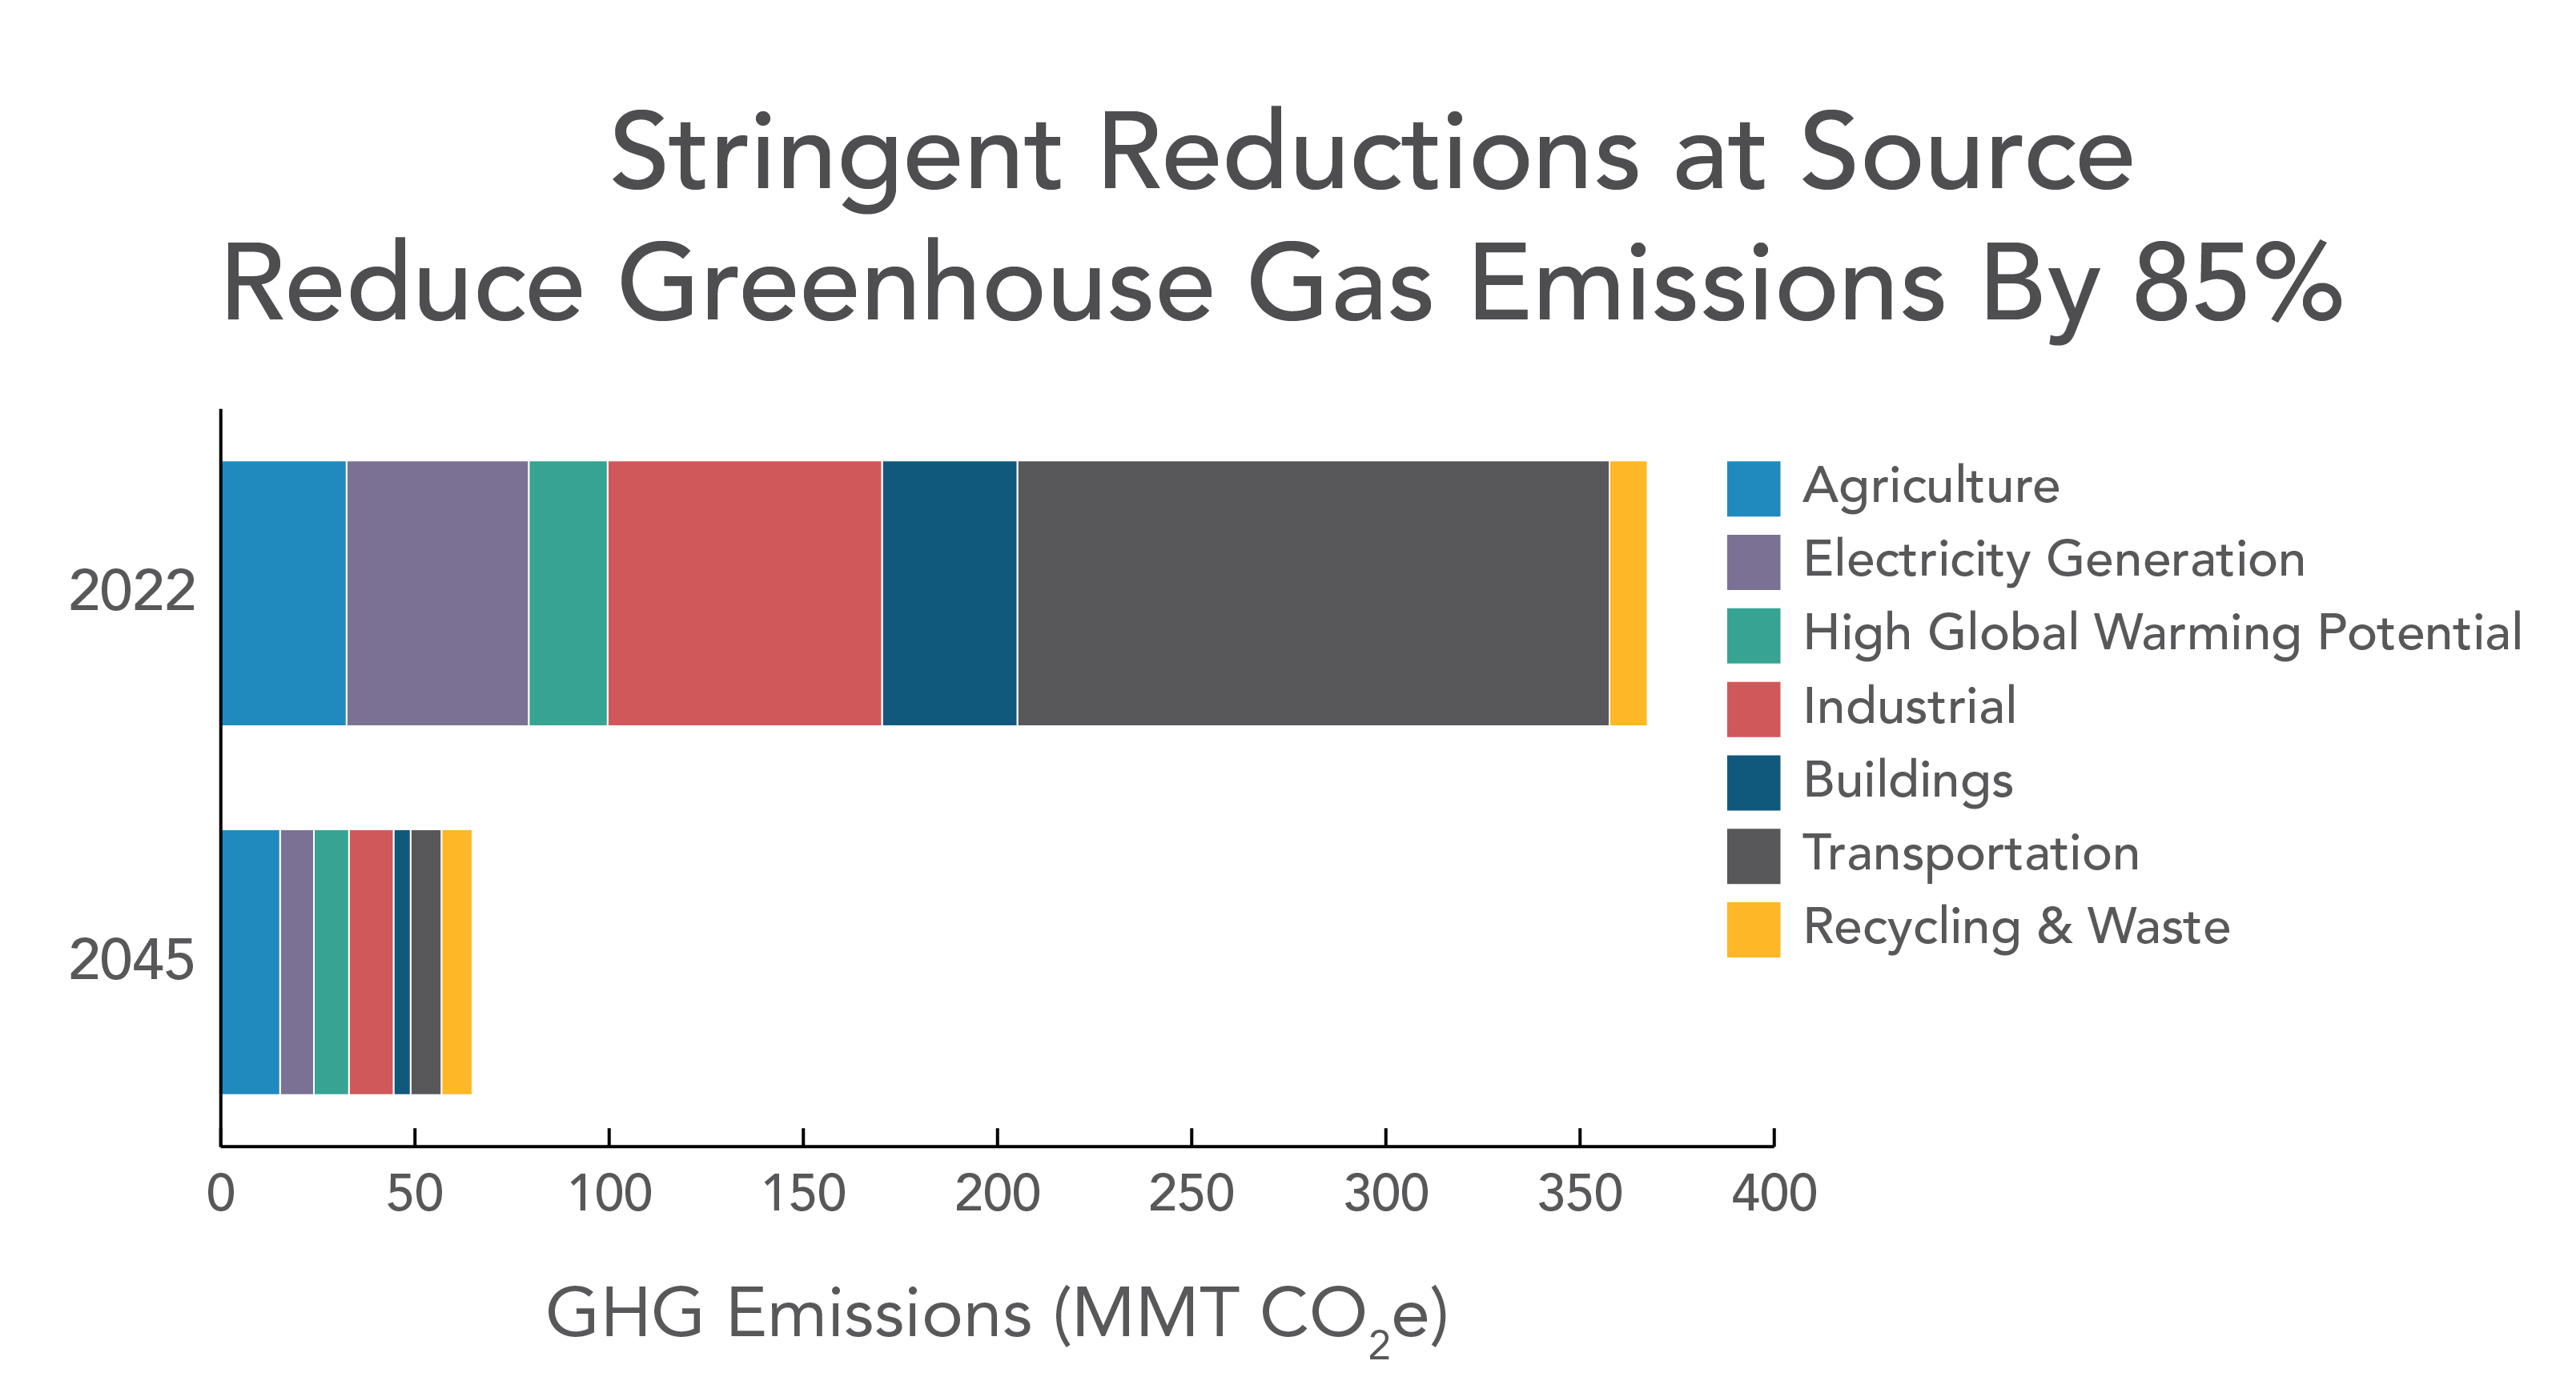  Stringent reductions at source reduce greenhouse gas emissions by 85%. Bar chart showing reductions in sector GHGs between 2022 and 2045